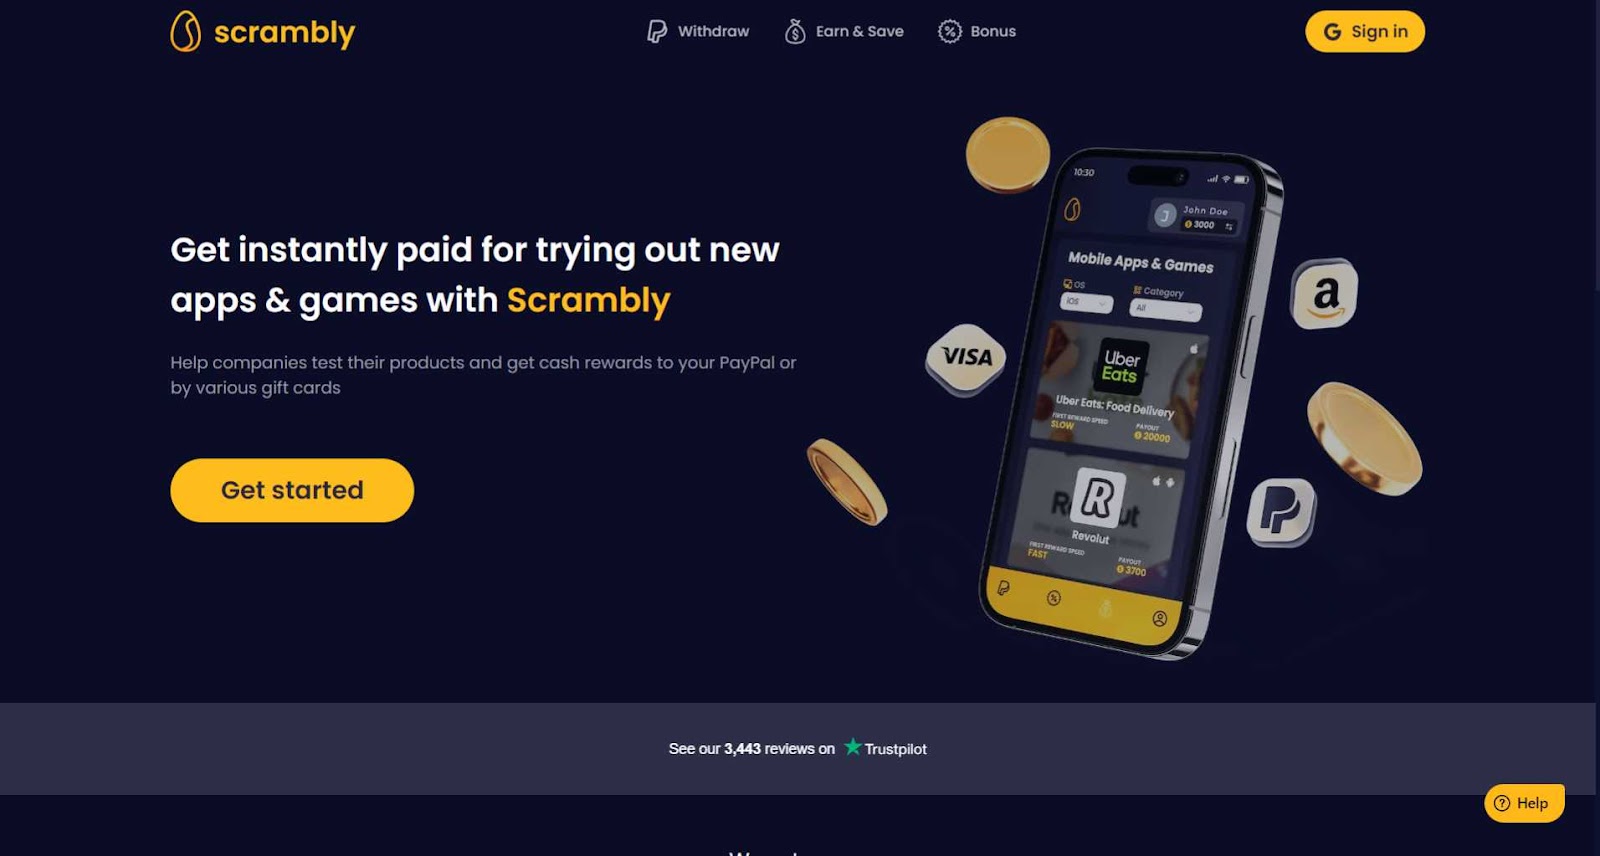 The Scrambly website inviting you to sign up and get paid for trying out games and apps. 